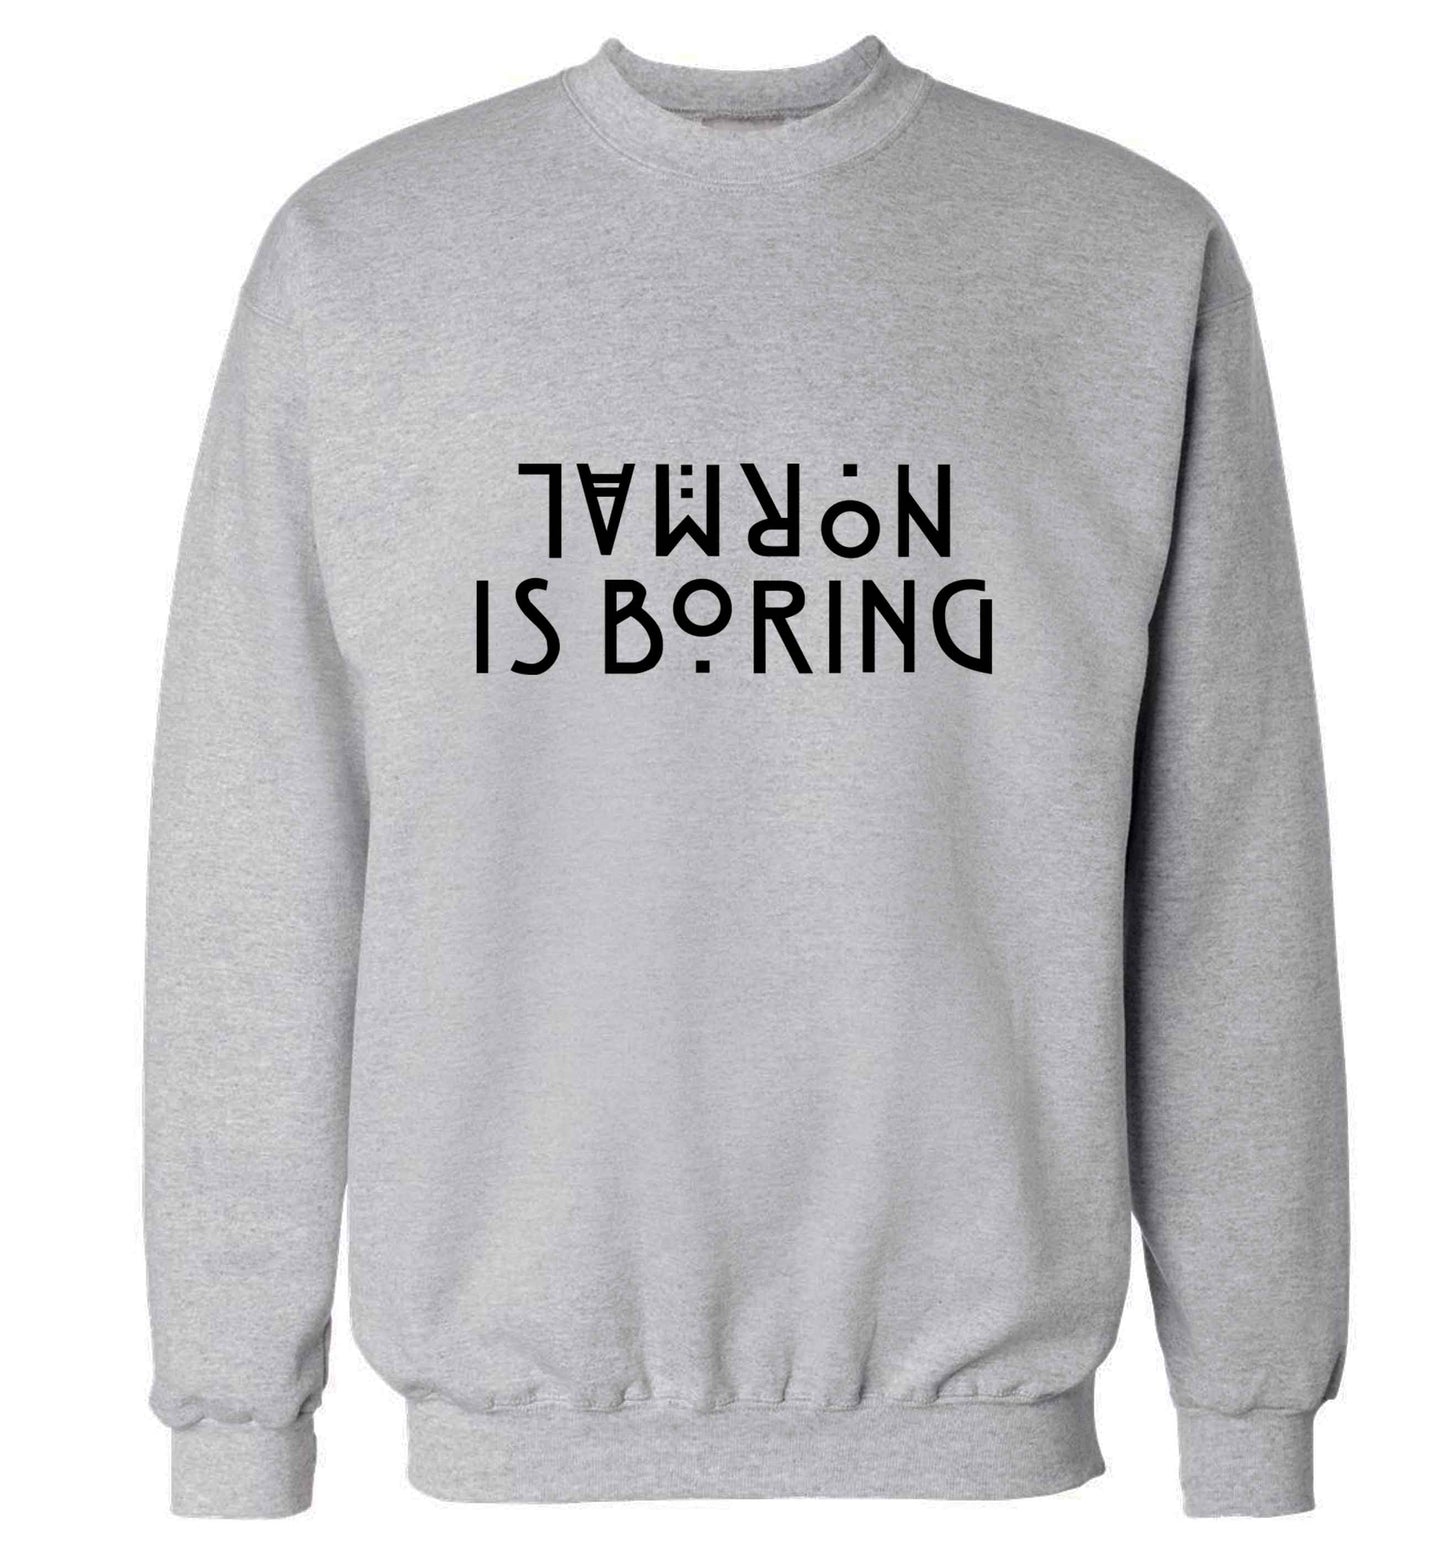 Normal is boring adult's unisex grey sweater 2XL